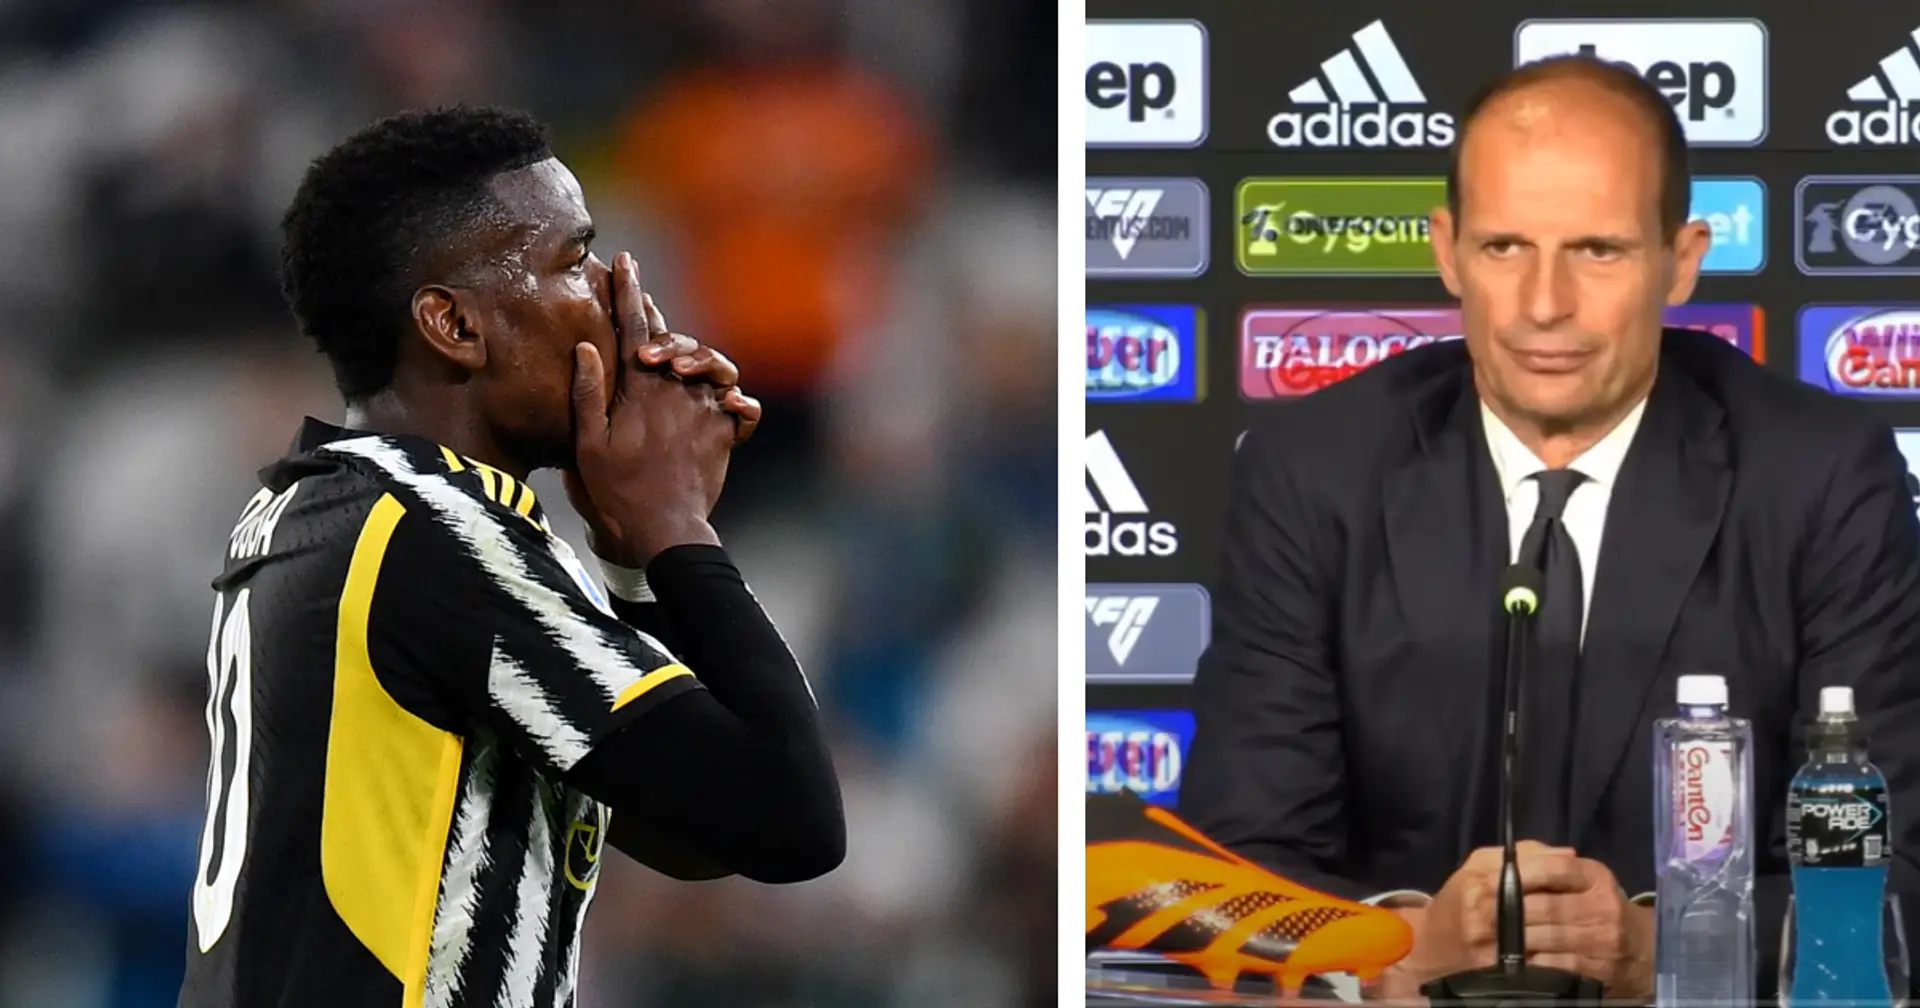 Allegri reacts to yet another Paul Pogba injury as Frenchman leaves pitch in tears after just 24 minutes